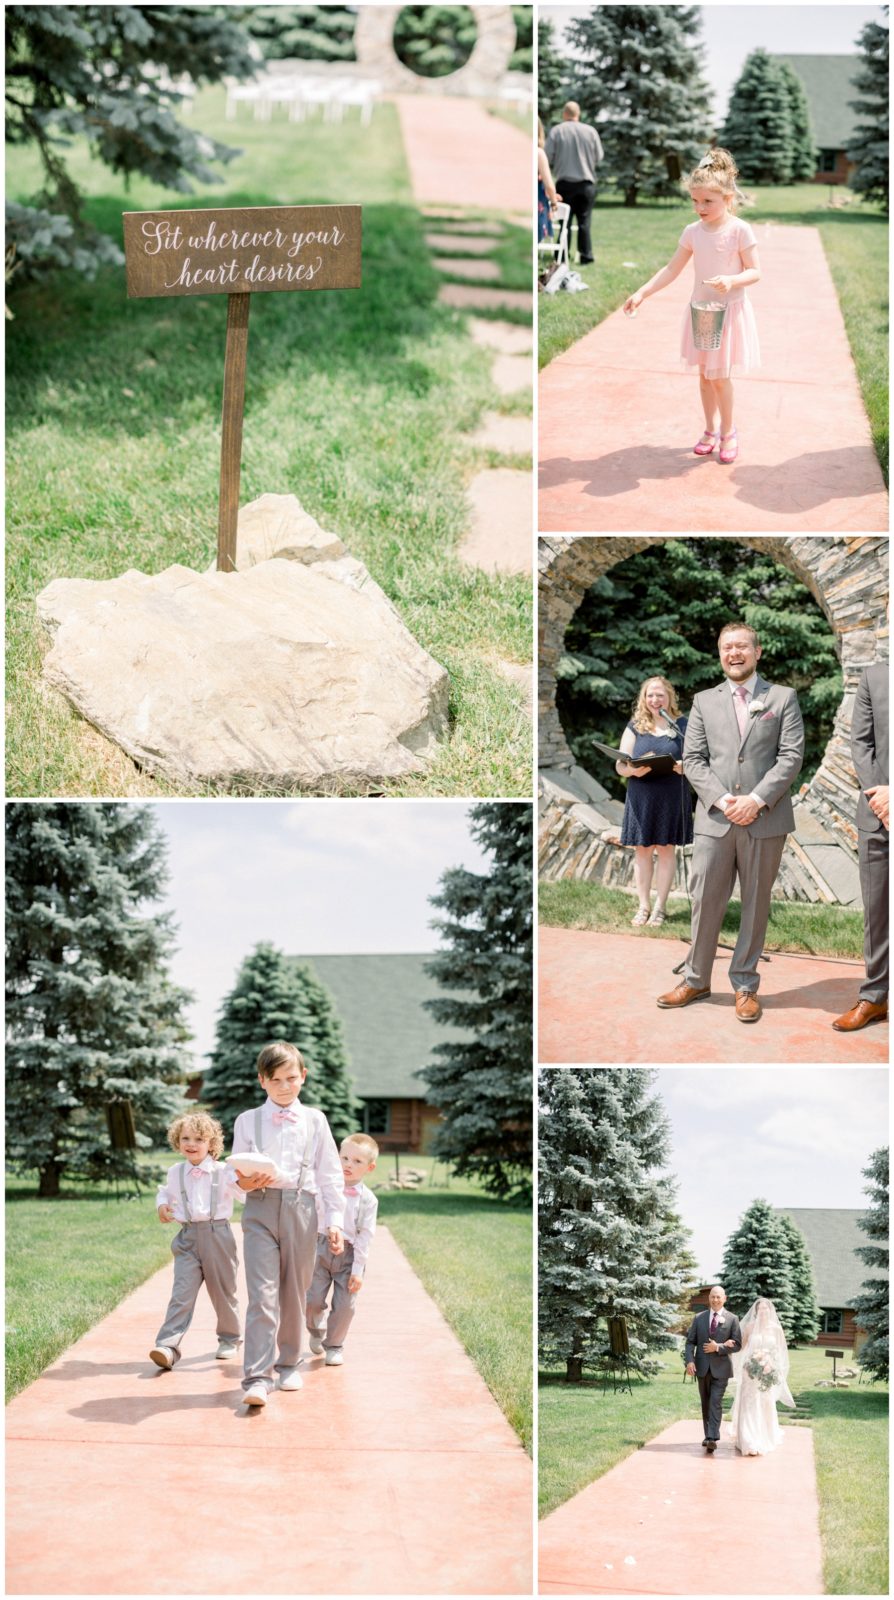 Compilation of phots. One shows a sign with writings on it. The other shows a flower girl coming down the aisle. Another photo shows the groom smiling. There also a photo of three boys and one is carrying the wedding rings. The last photo shows the bride and her father coming down the aisle.